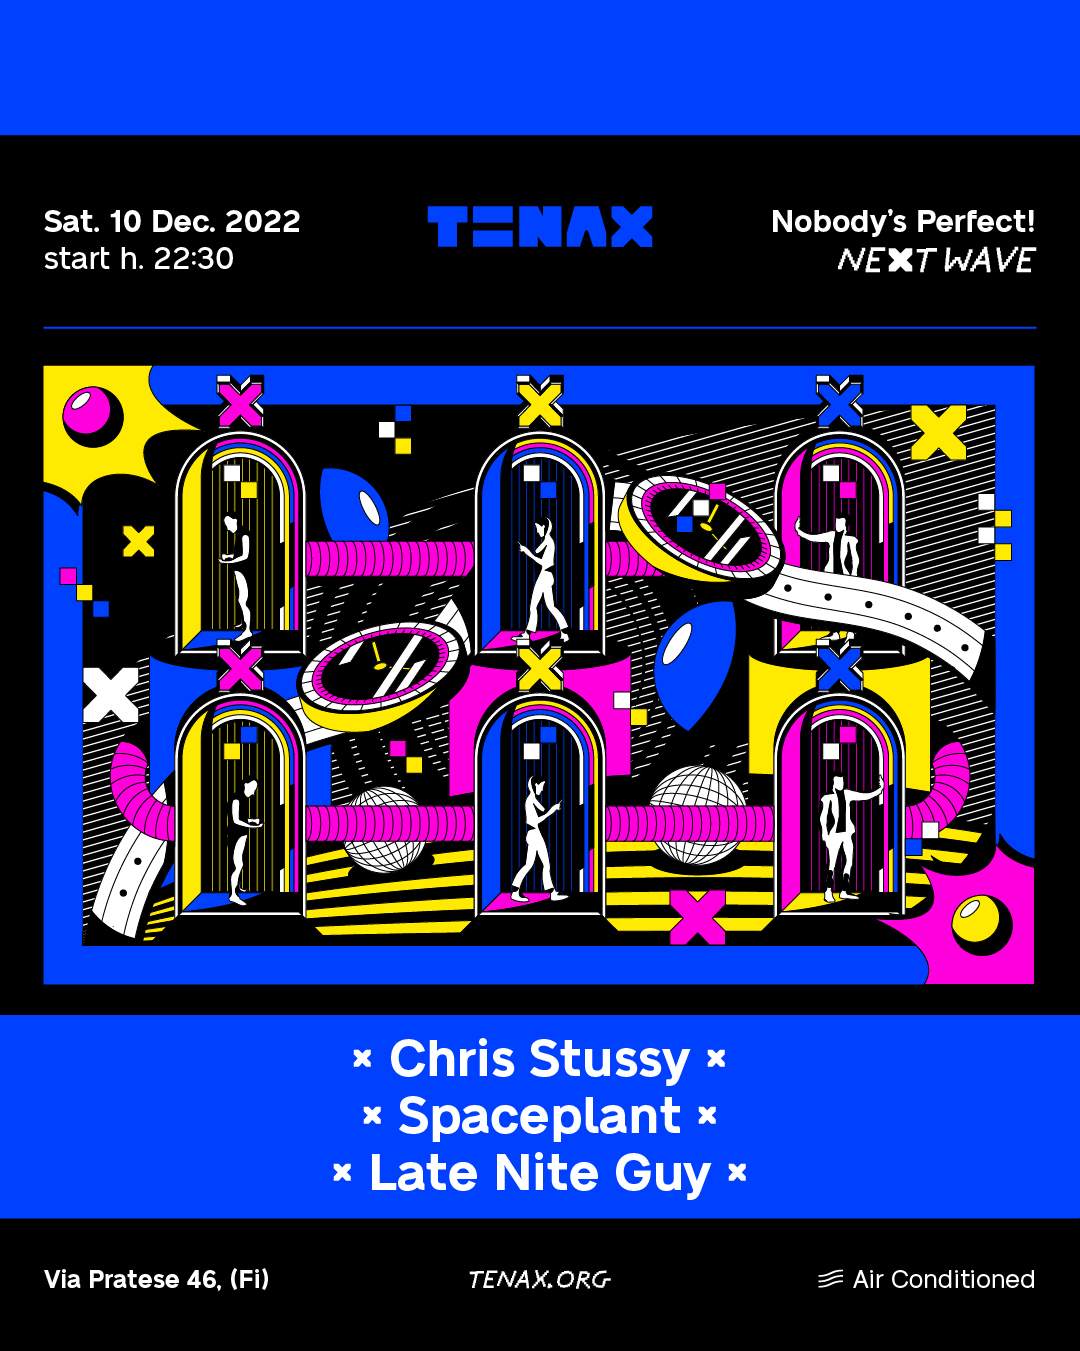 Tenax Nobody's Perfect! with Chris Stussy, Spaceplant, Late Nite Guy - Página frontal